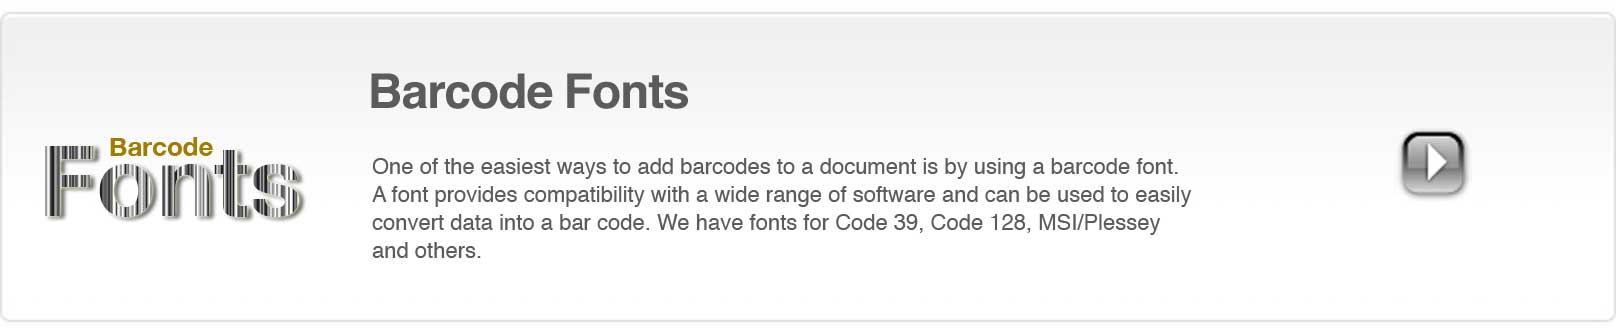 One of the easiest ways to add a barcode to a document is by using a barcode font. A bar code font provides compatibility with a wide range of software and can be used to easily convert data into a barcode. We have fonts for Code 39, Code 128, MSI/Plessey and others.